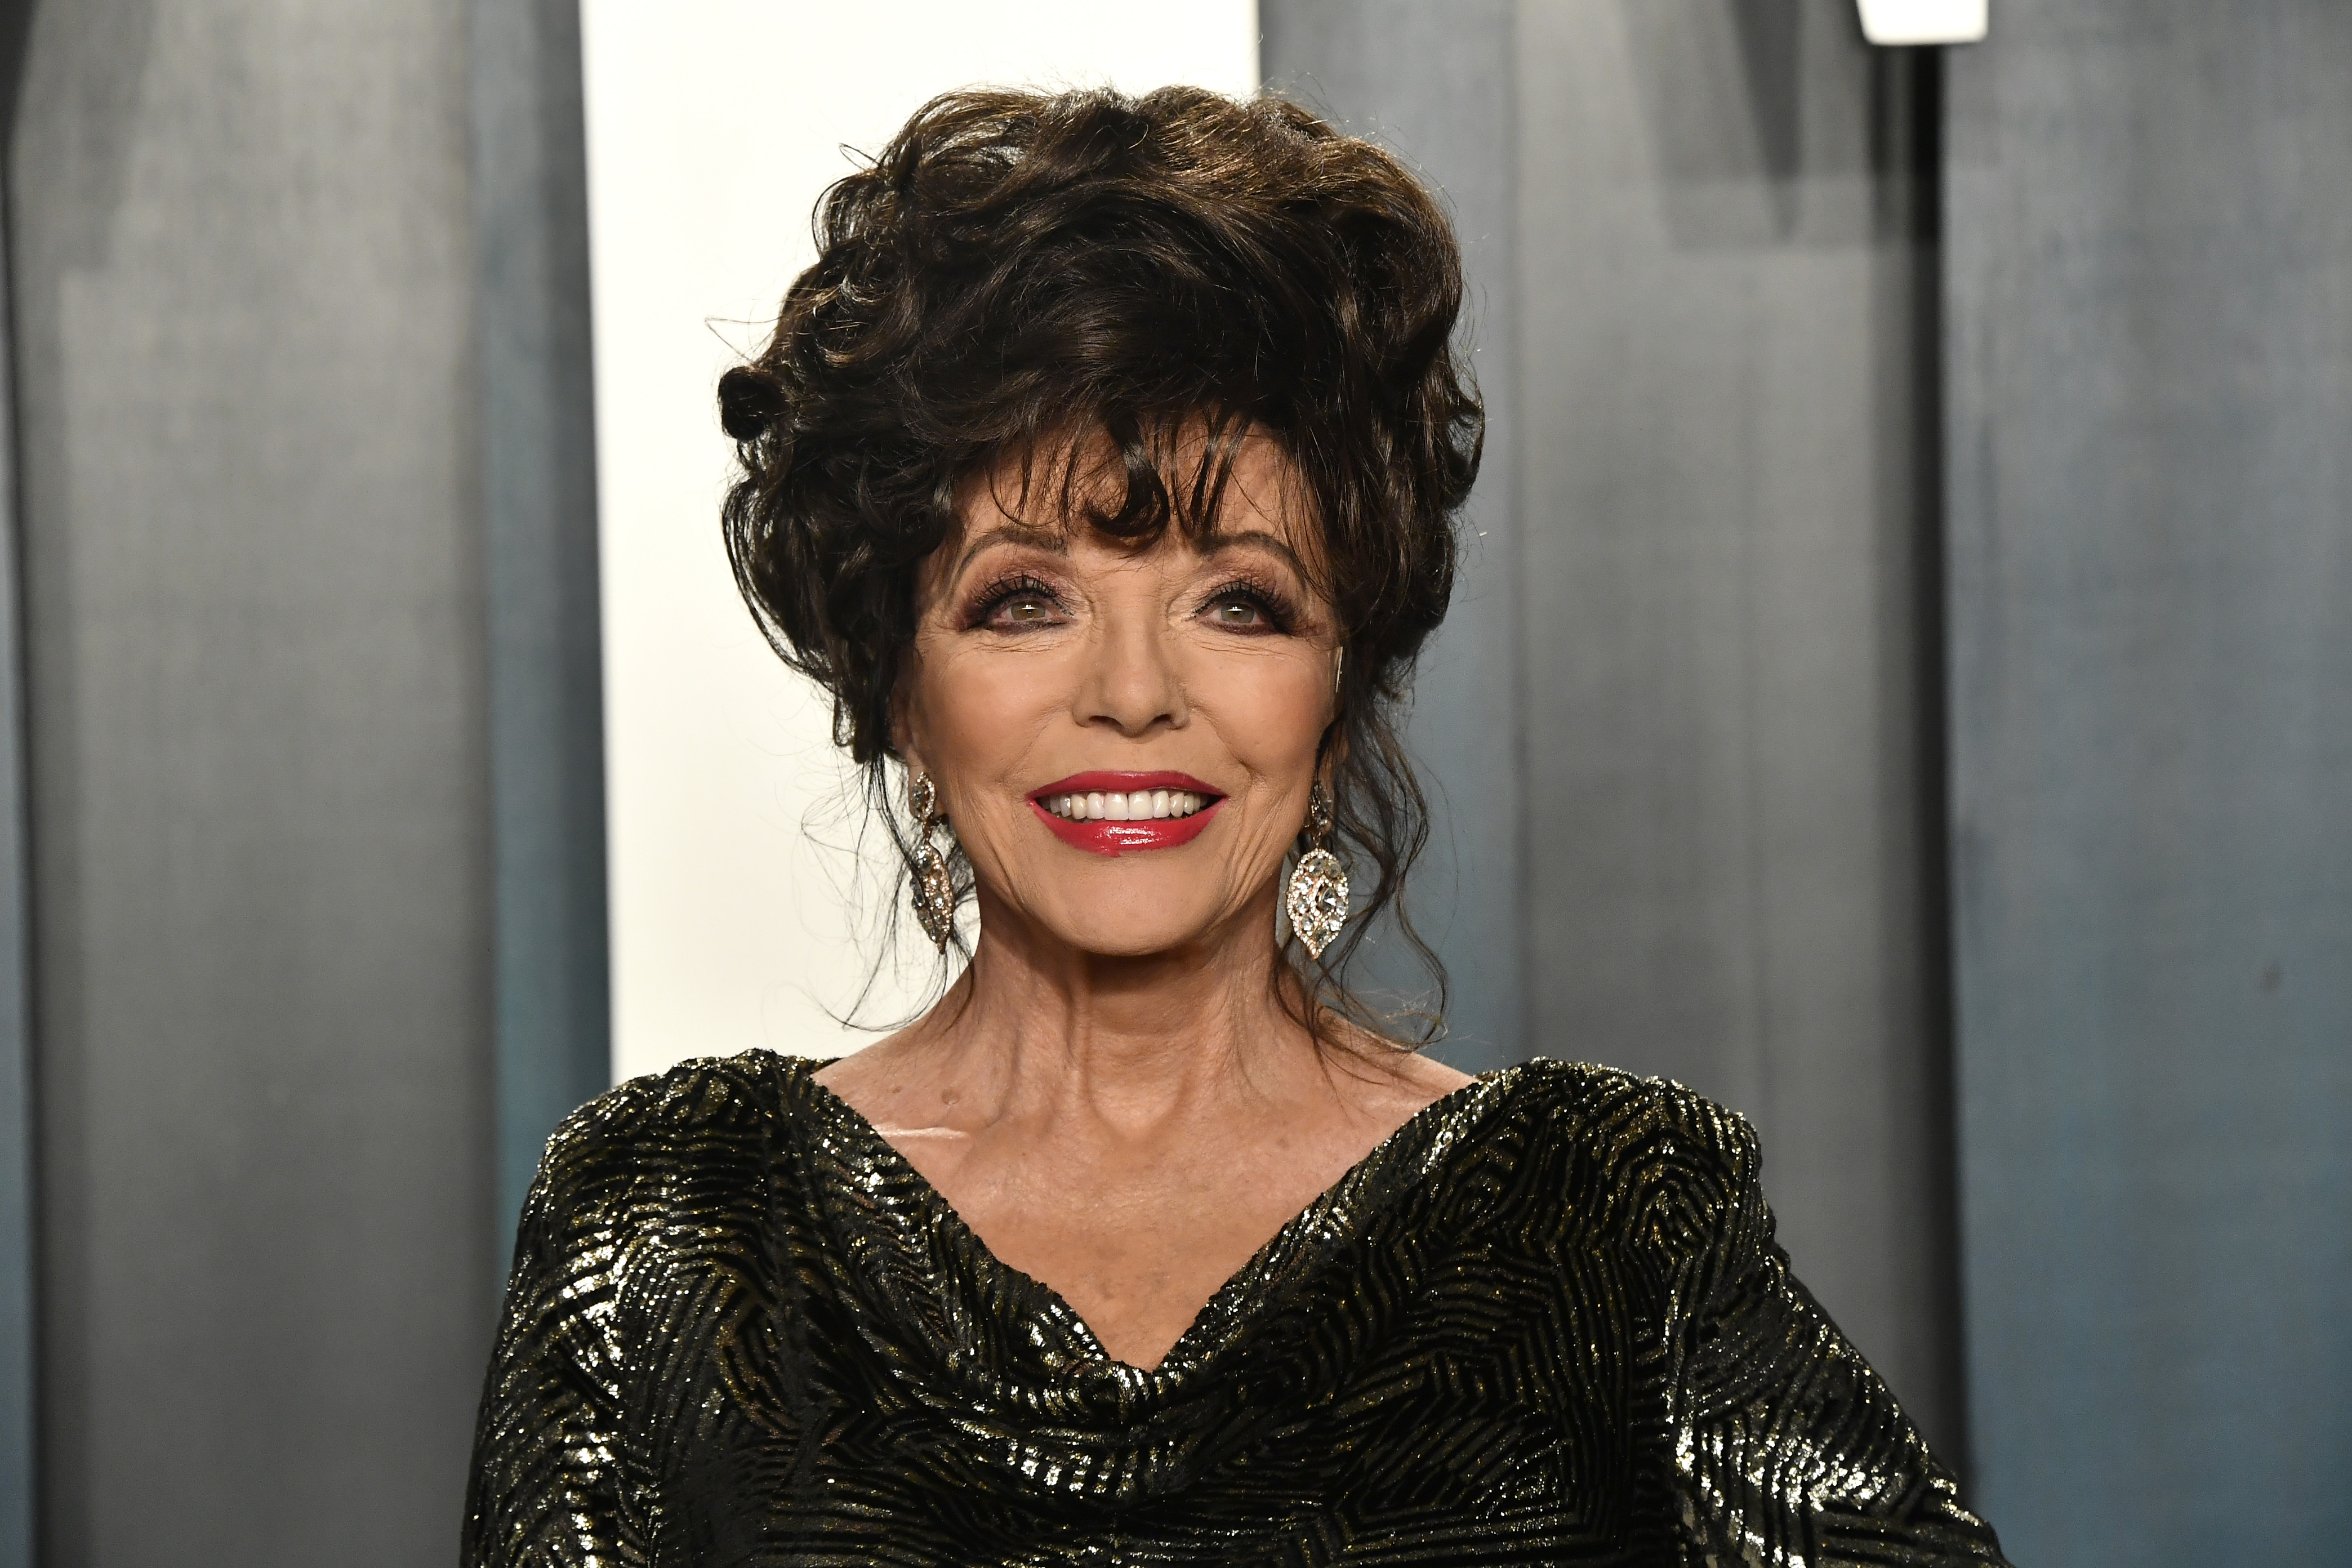 Joan Collins attends the 2020 Vanity Fair Oscar Party hosted by Radhika Jones at Wallis Annenberg Center for the Performing Arts on February 09, 2020 in Beverly Hills, California | Source: Getty Images